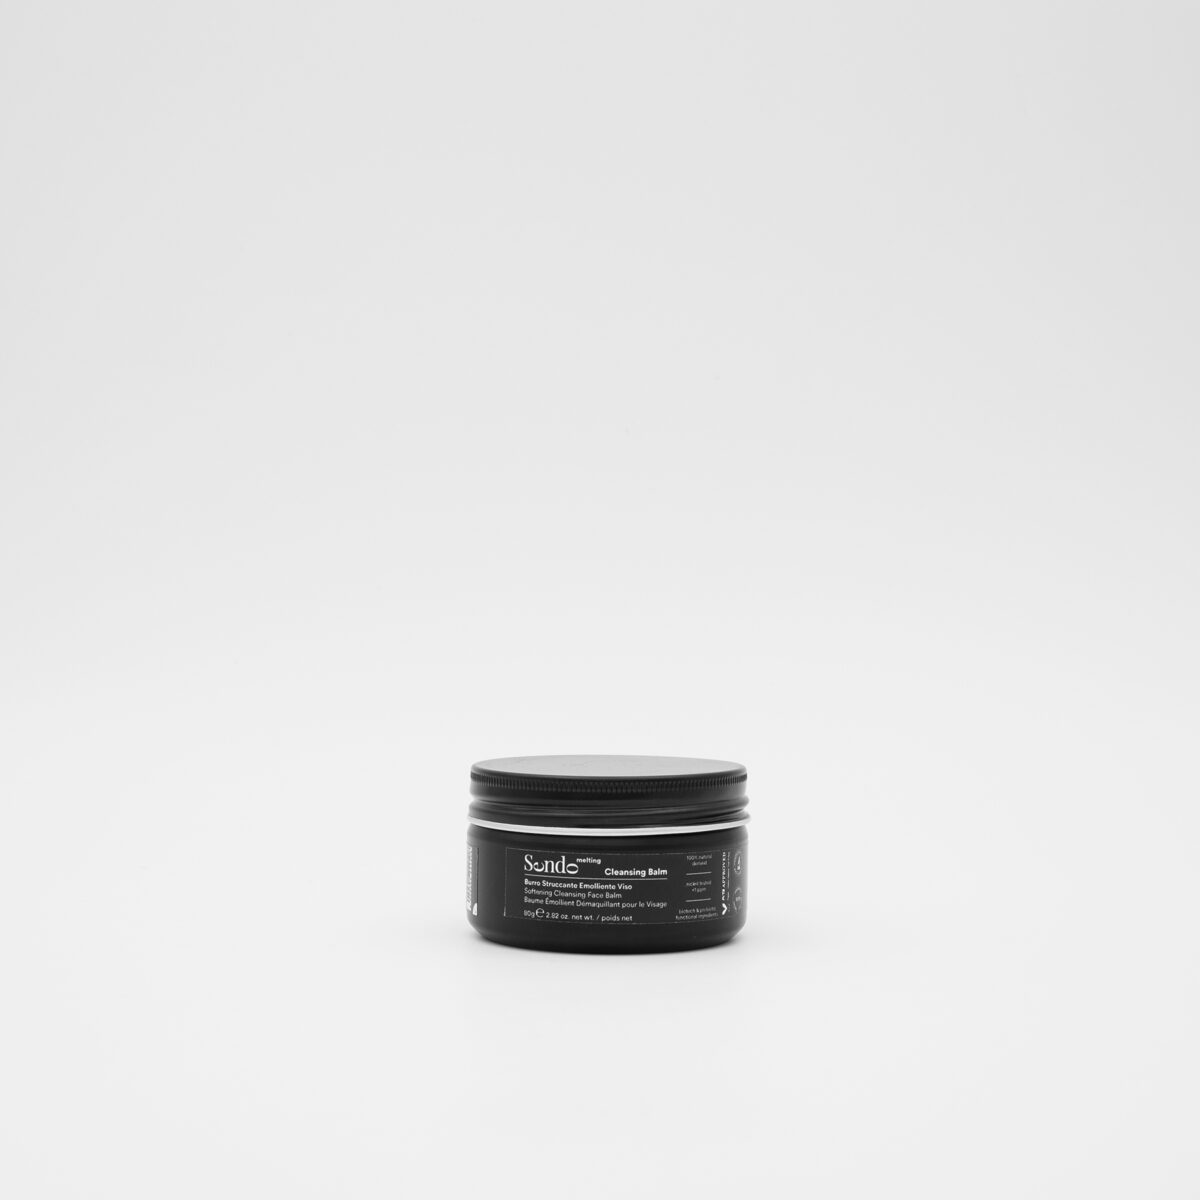 Softening-Cleansing-Face-Balm-Front.jpg